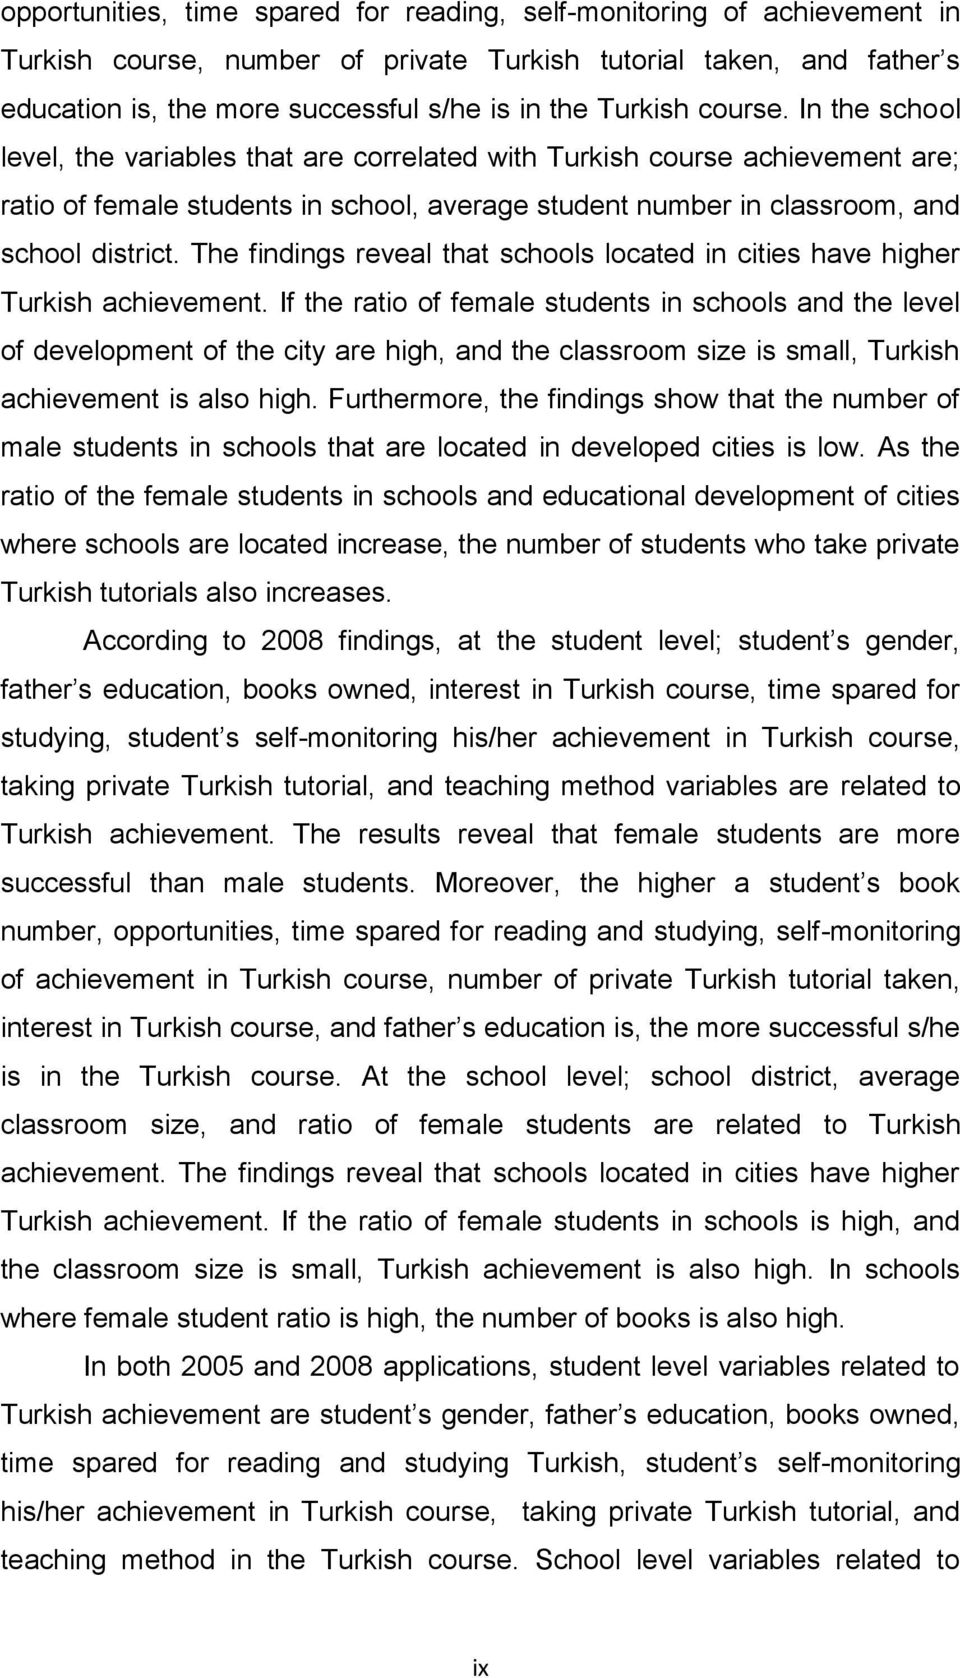 In the school level, the variables that are correlated with Turkish course achievement are; ratio of female students in school, average student number in classroom, and school district.